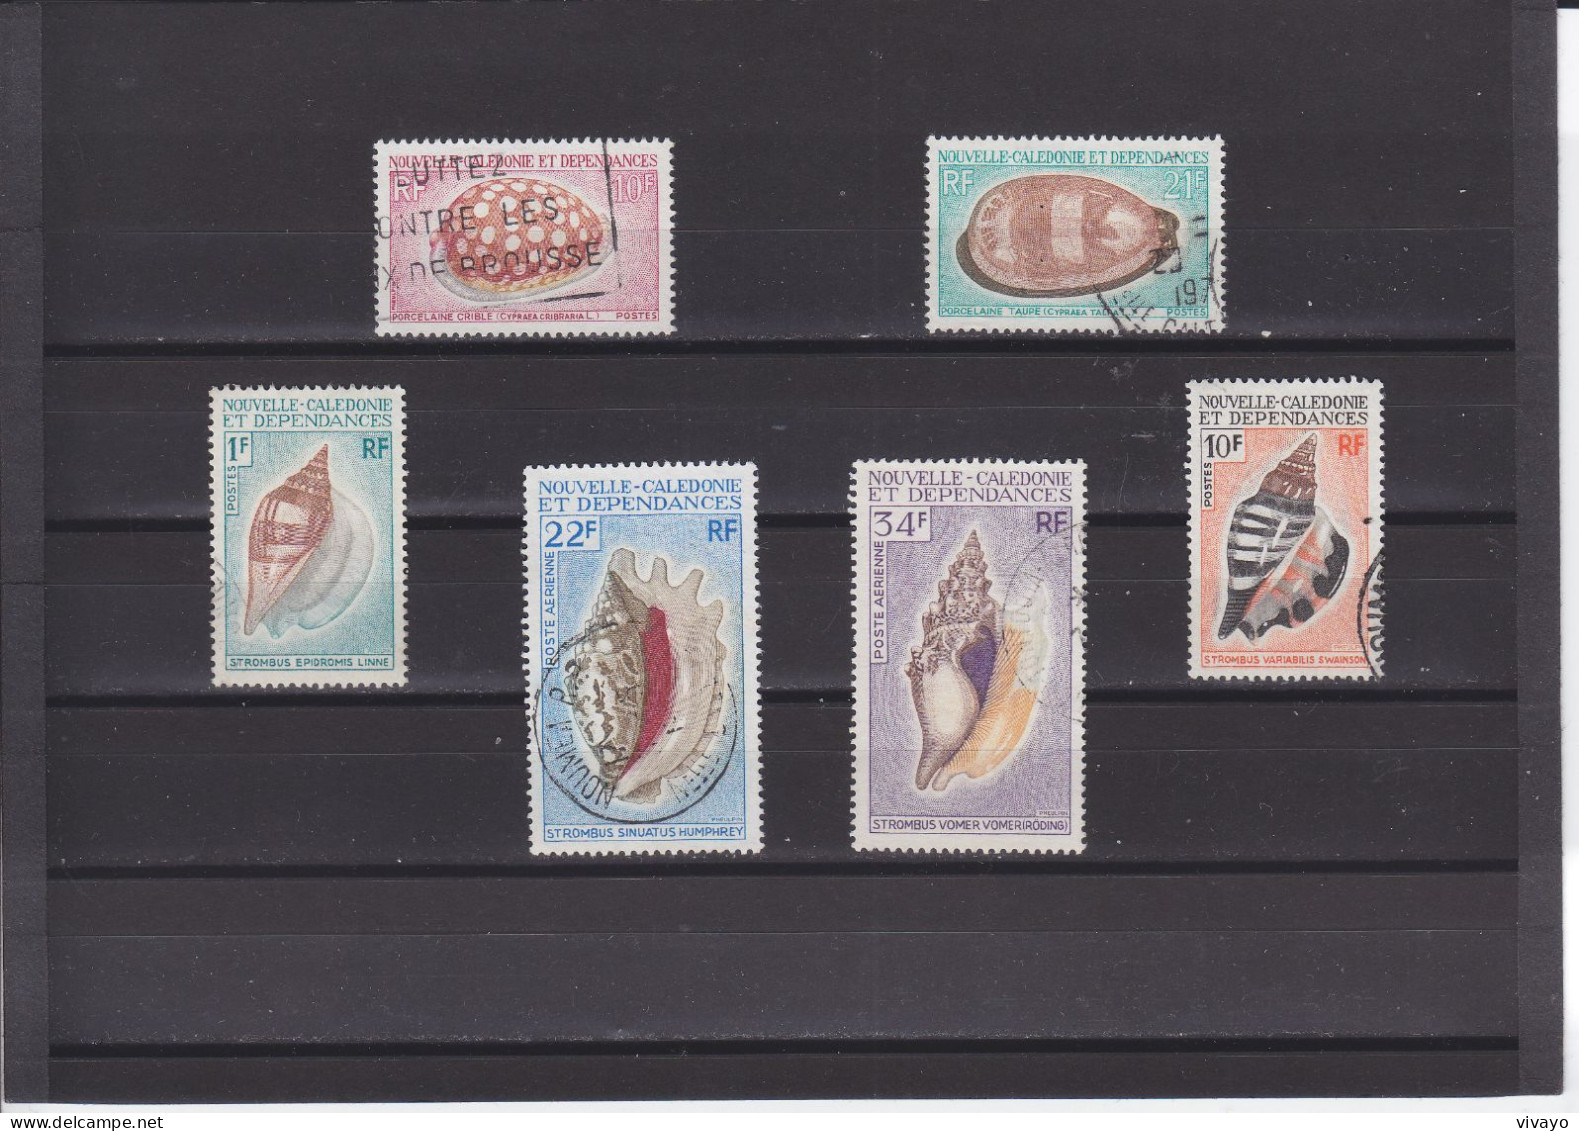 NOUVELLE CALEDONIE - O / FINE CANCELLED - 1970 - SHELLS - Yv. 368/71, PA. 113, 115  -  Mi. 486/7, 494/5, 496/7 - Used Stamps